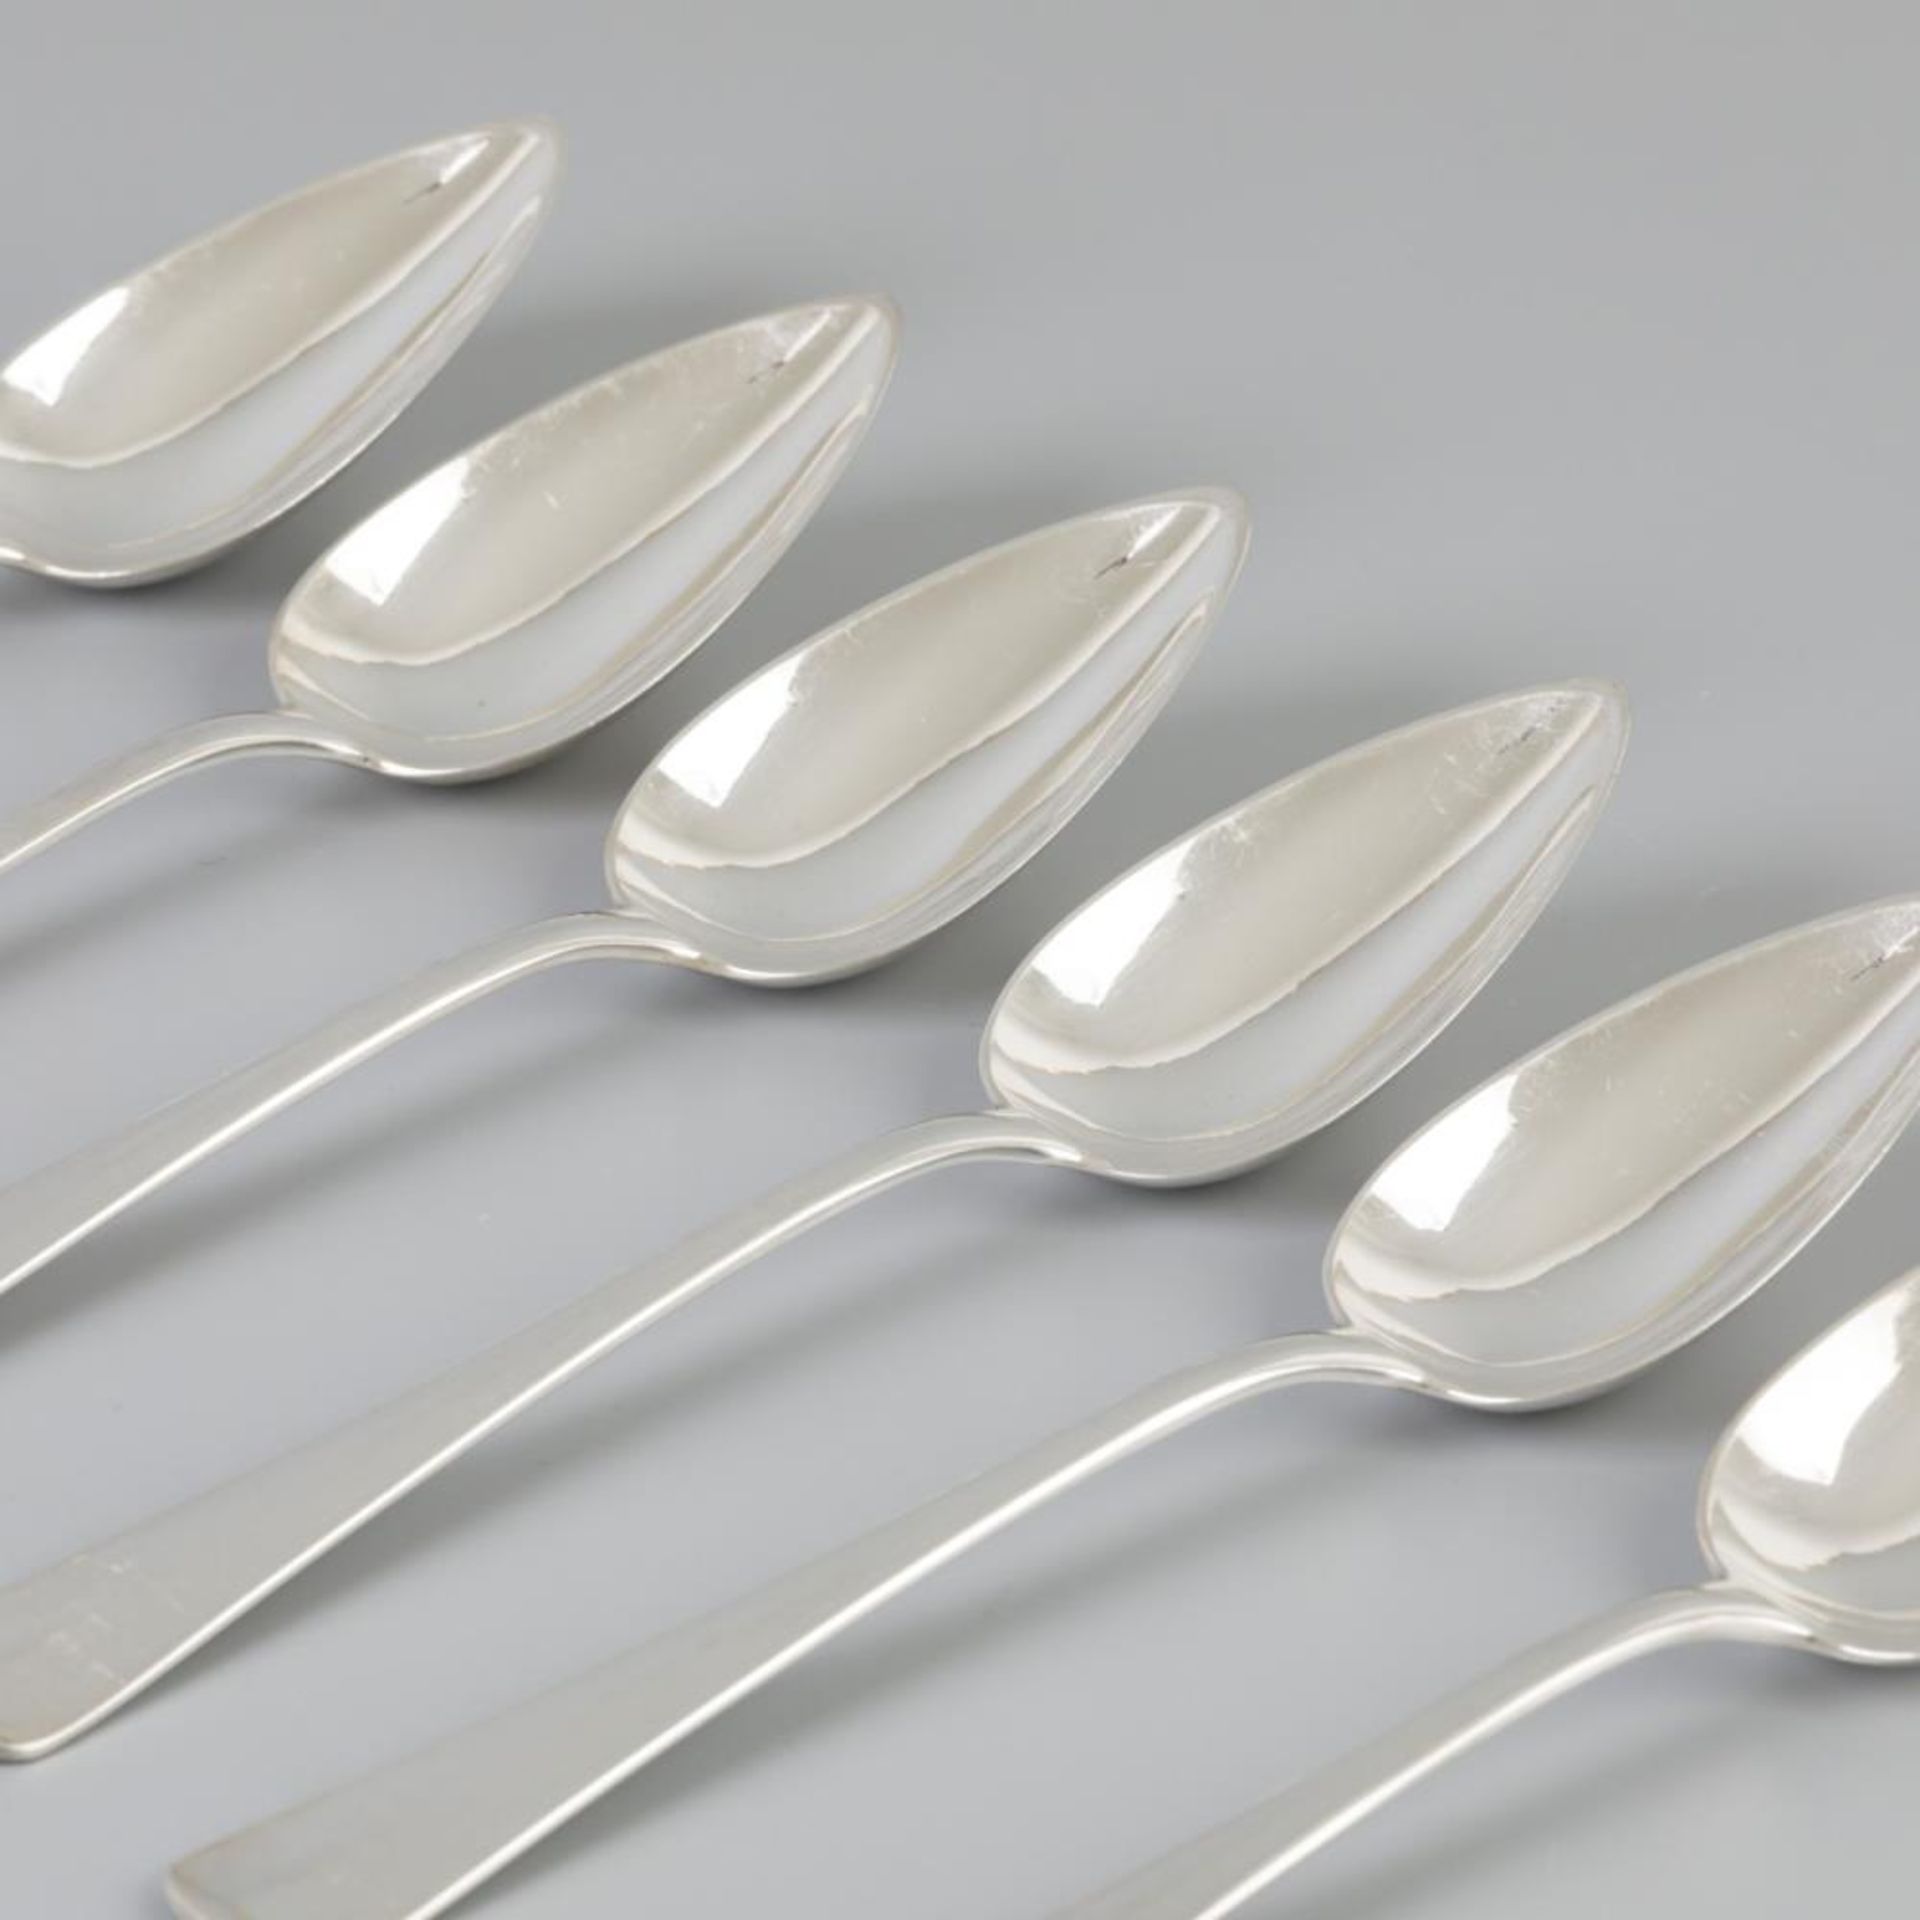 6 piece set dinner spoons "Haags Lofje" silver. - Image 2 of 6